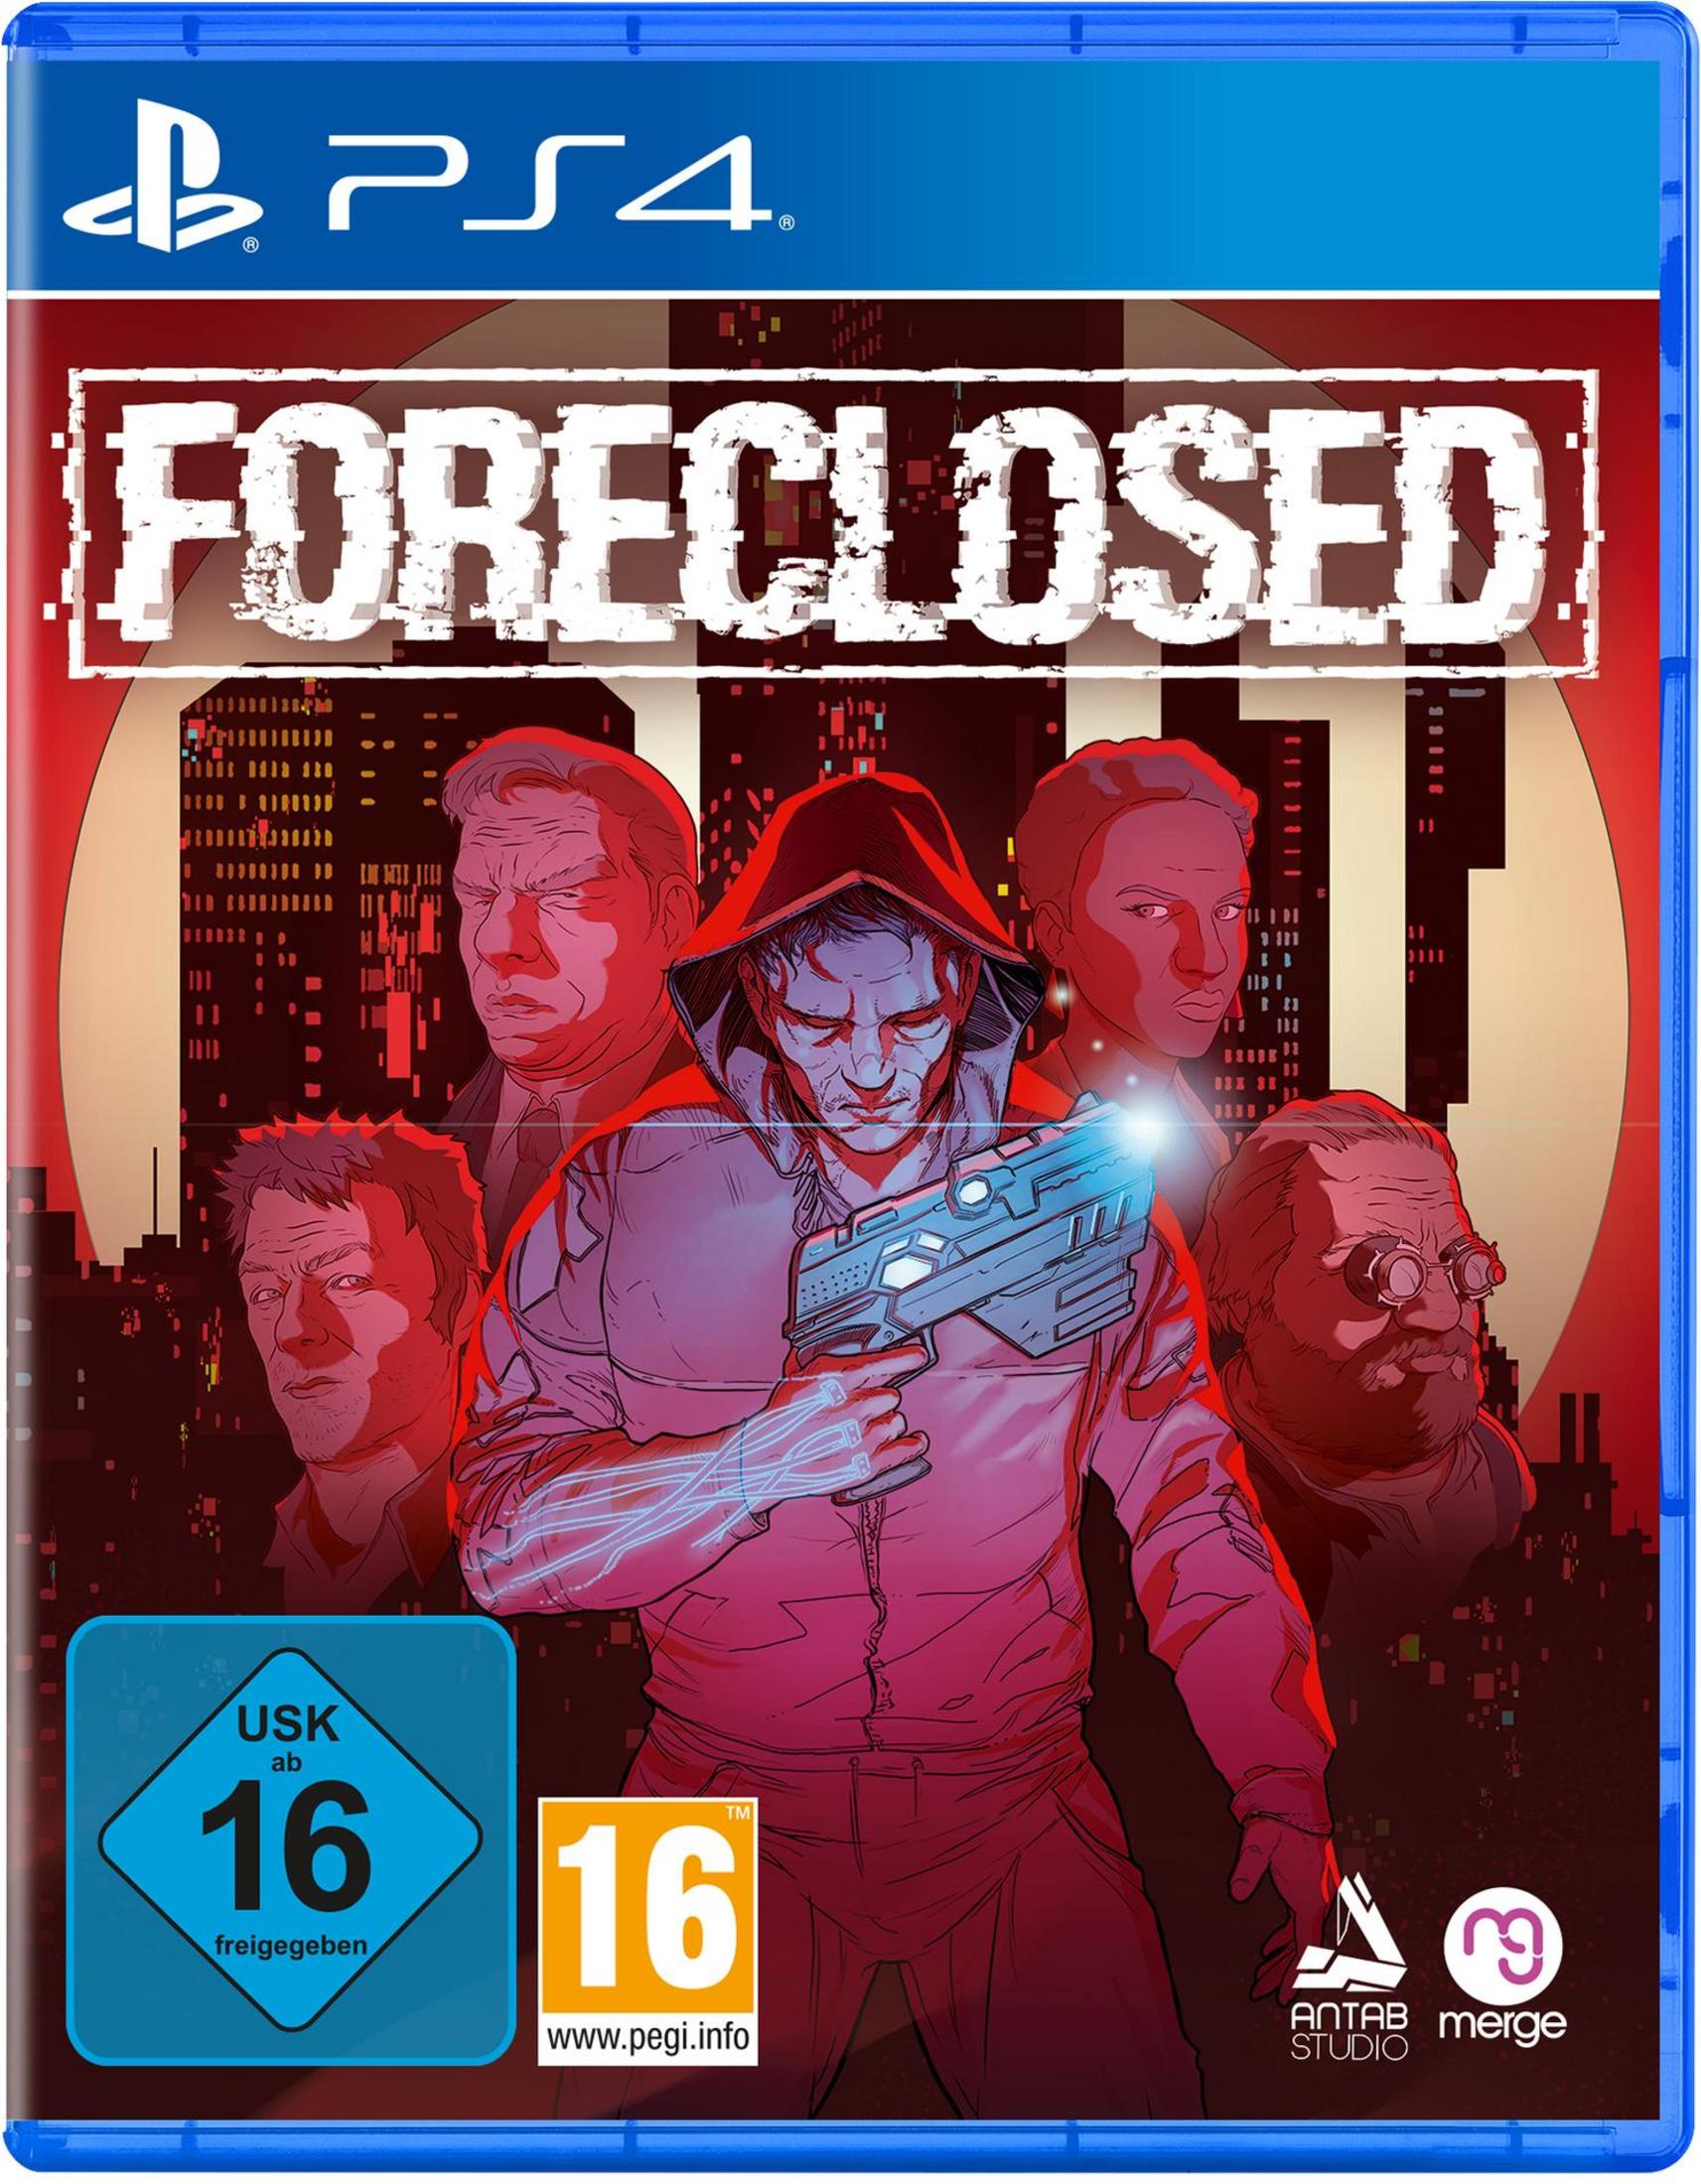 Foreclosed PS-4 4] [PlayStation -